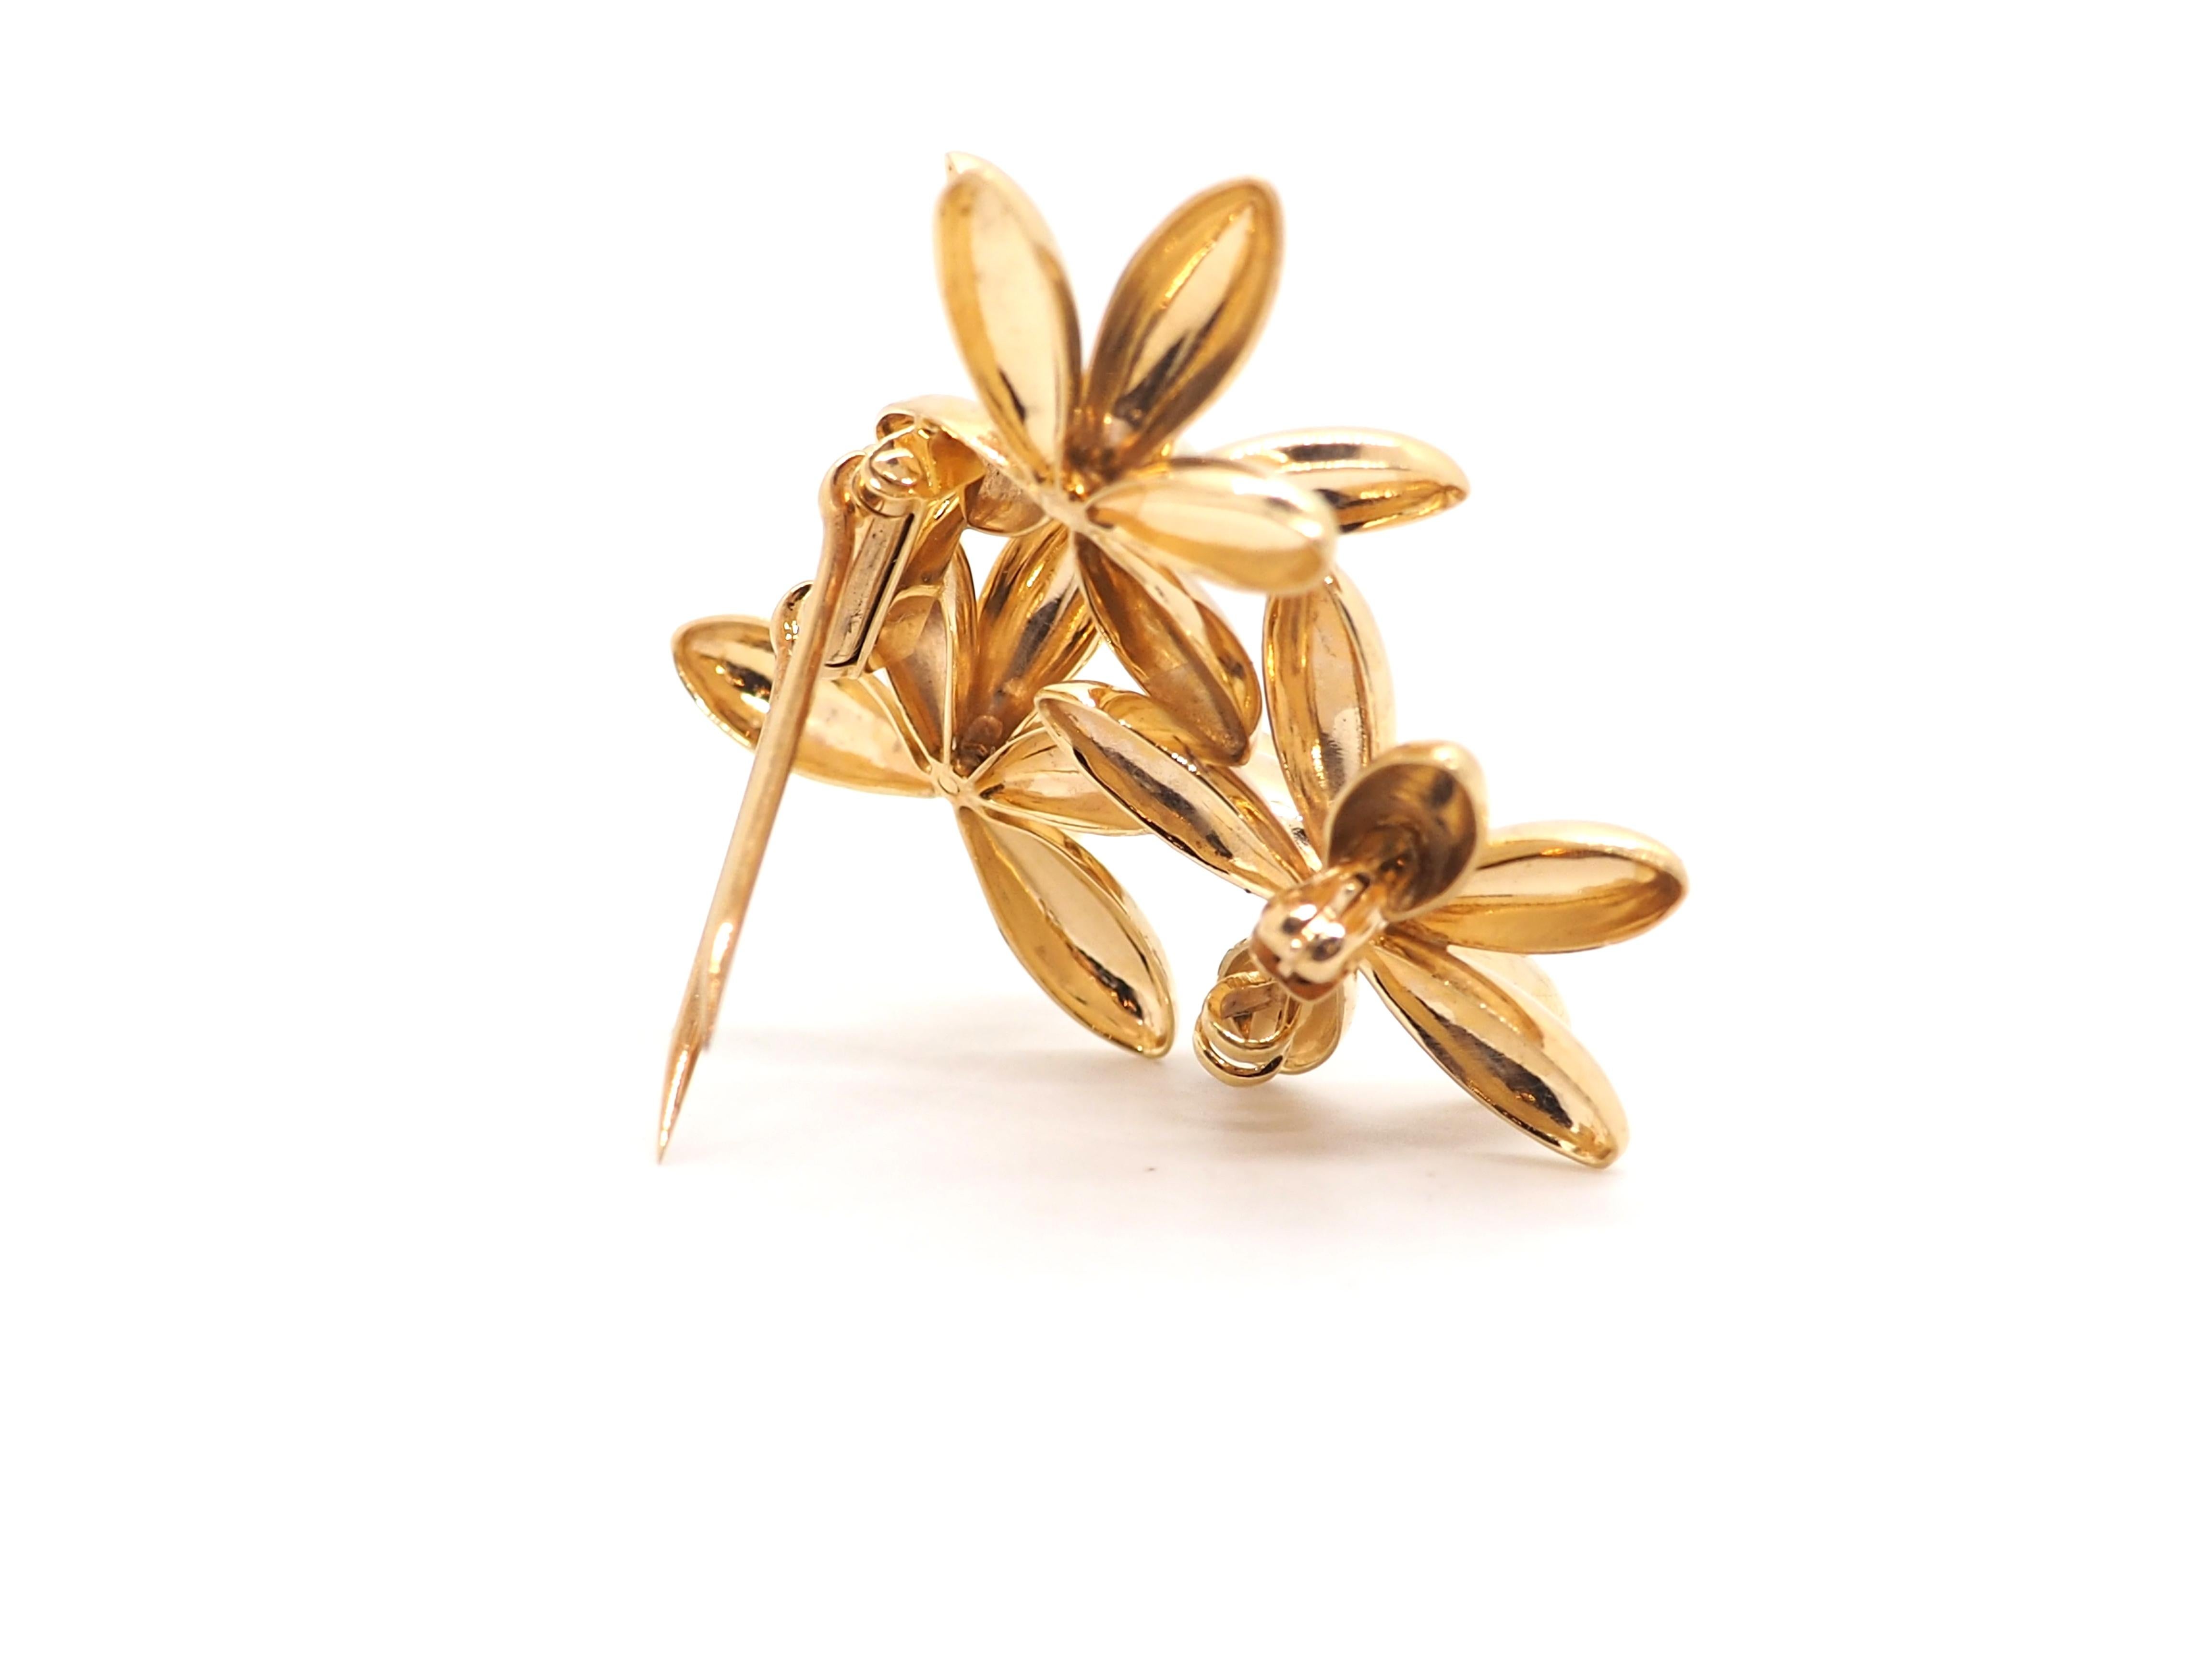 Rare Vintage Cartier 14k Yellow Gold Brooch with Exquisite 3-Flower Design. Step into a world of opulence and elegance with our extraordinary Vintage Cartier Brooch.

With its intricate detailing and impeccable craftsmanship, this brooch is a true